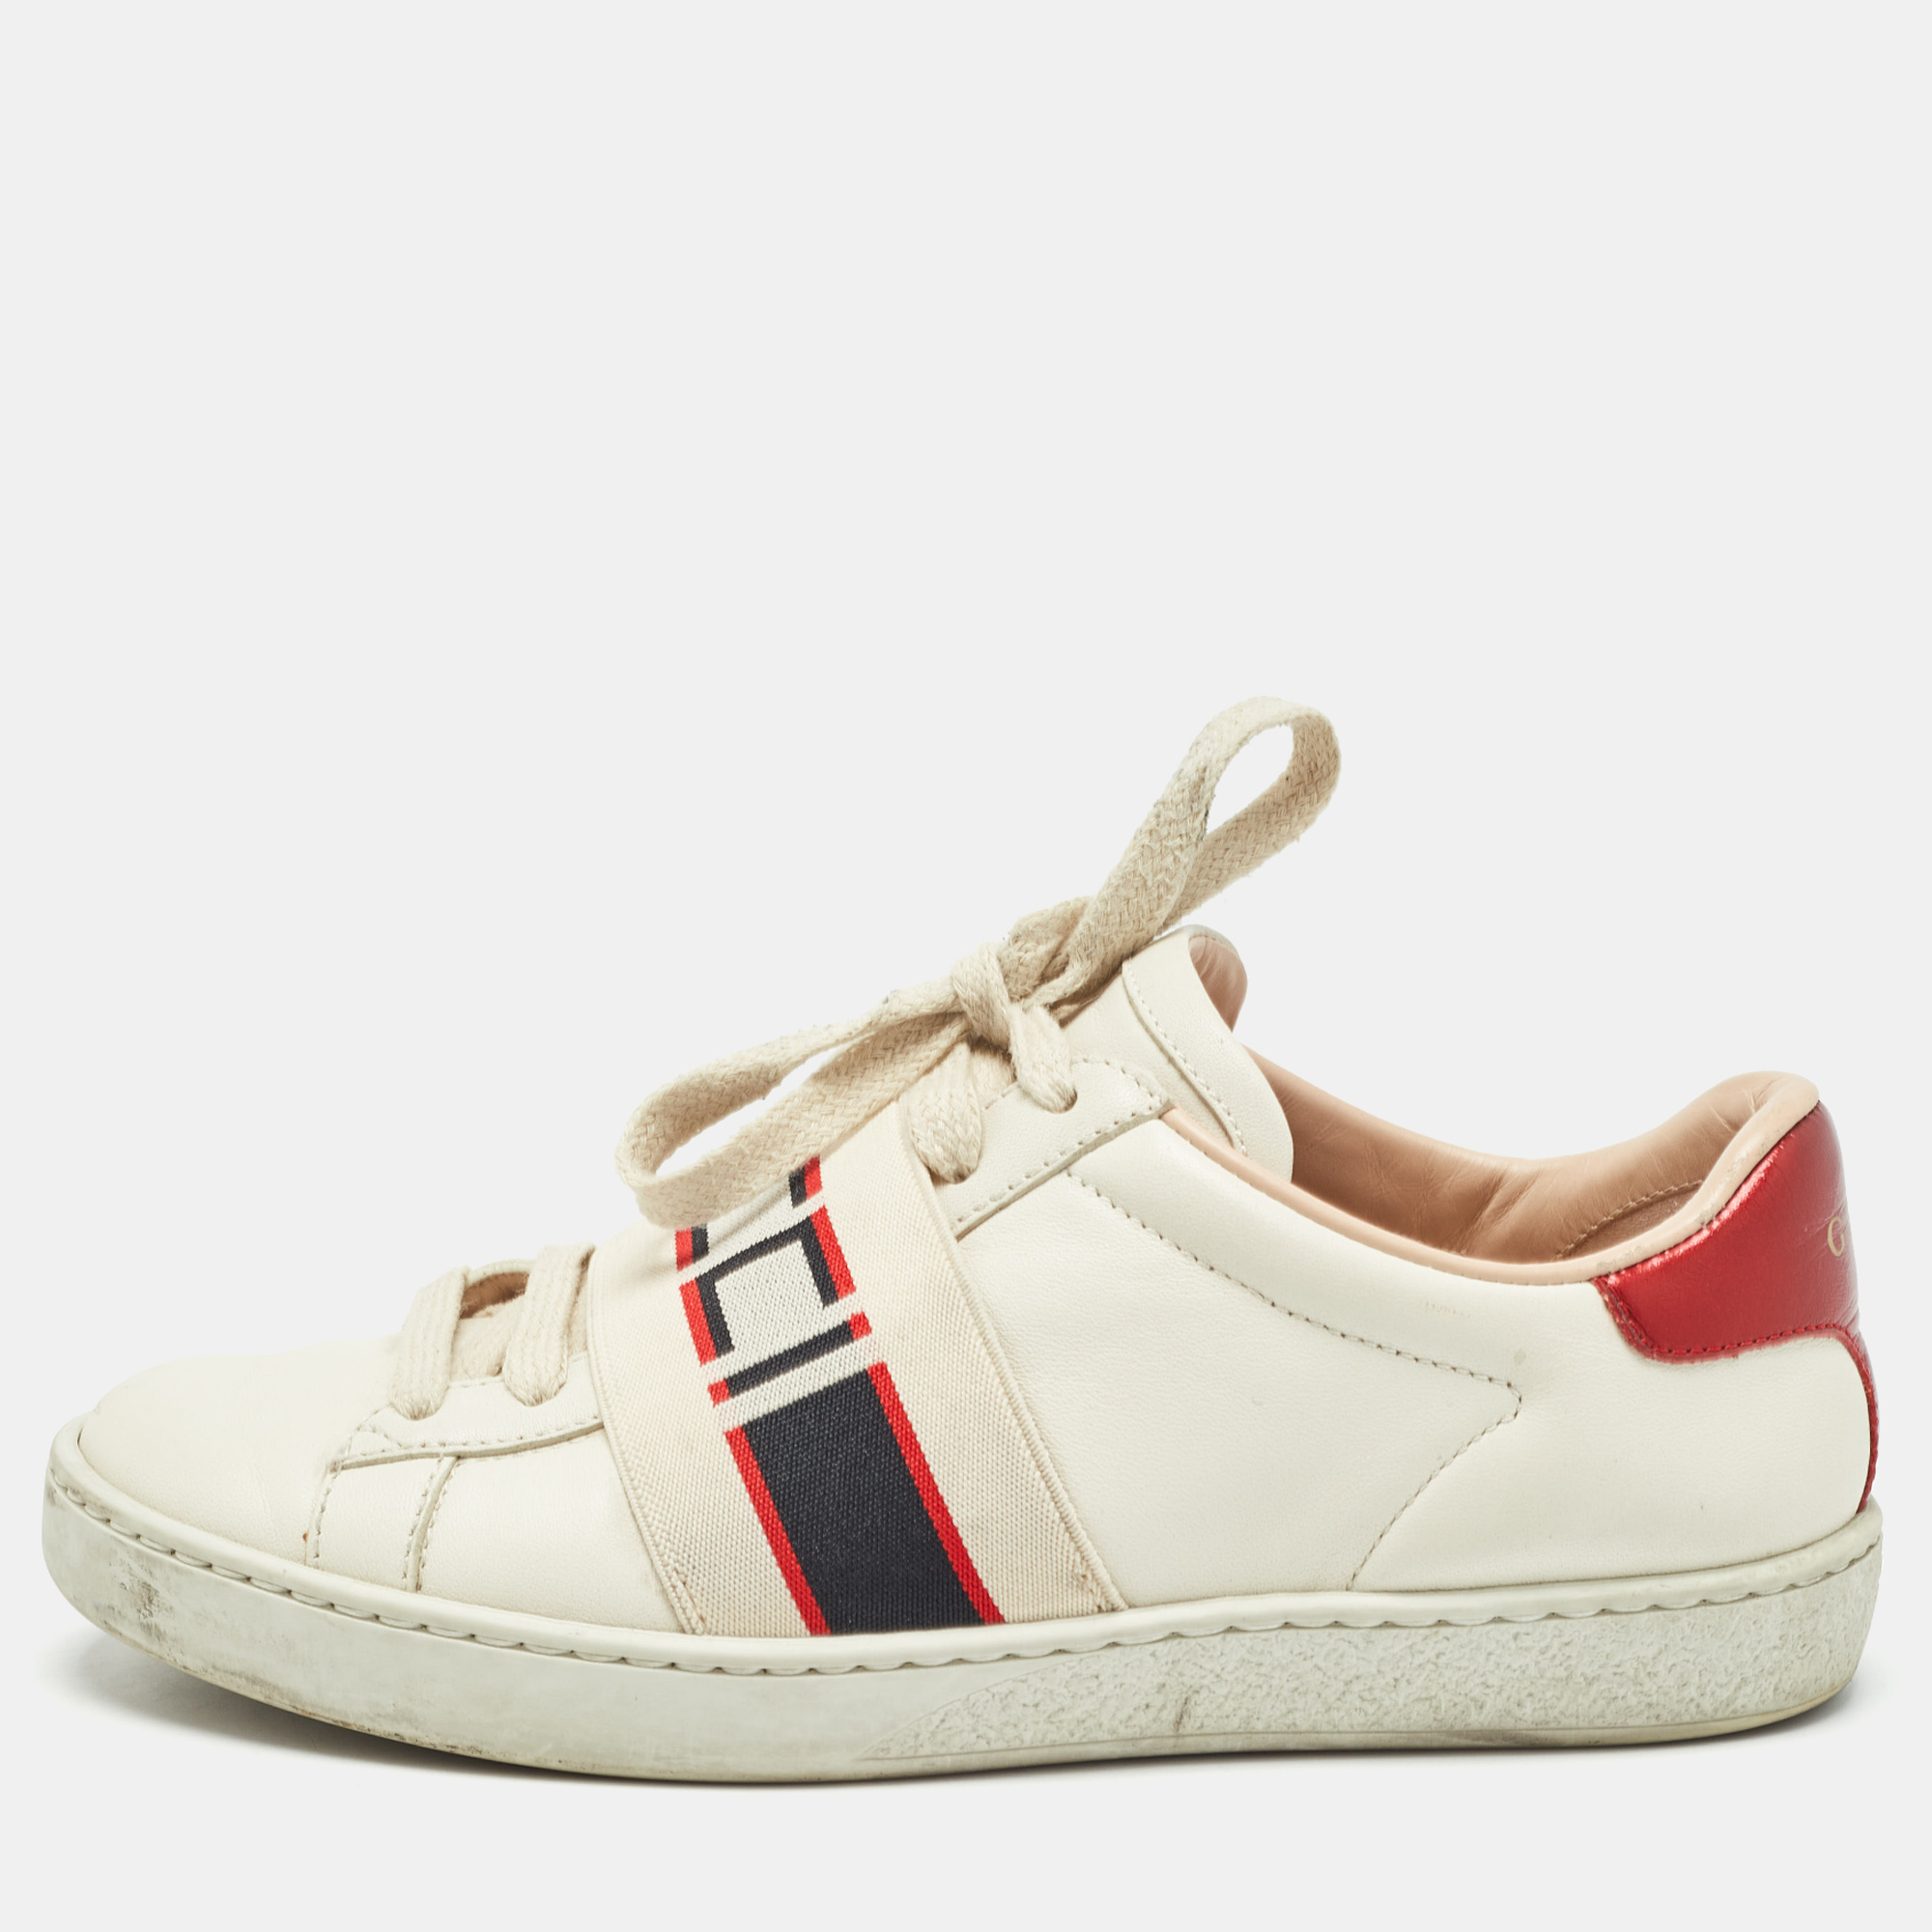 

Gucci White/Red Leather Ace Gucci Band Low Top Sneakers Size